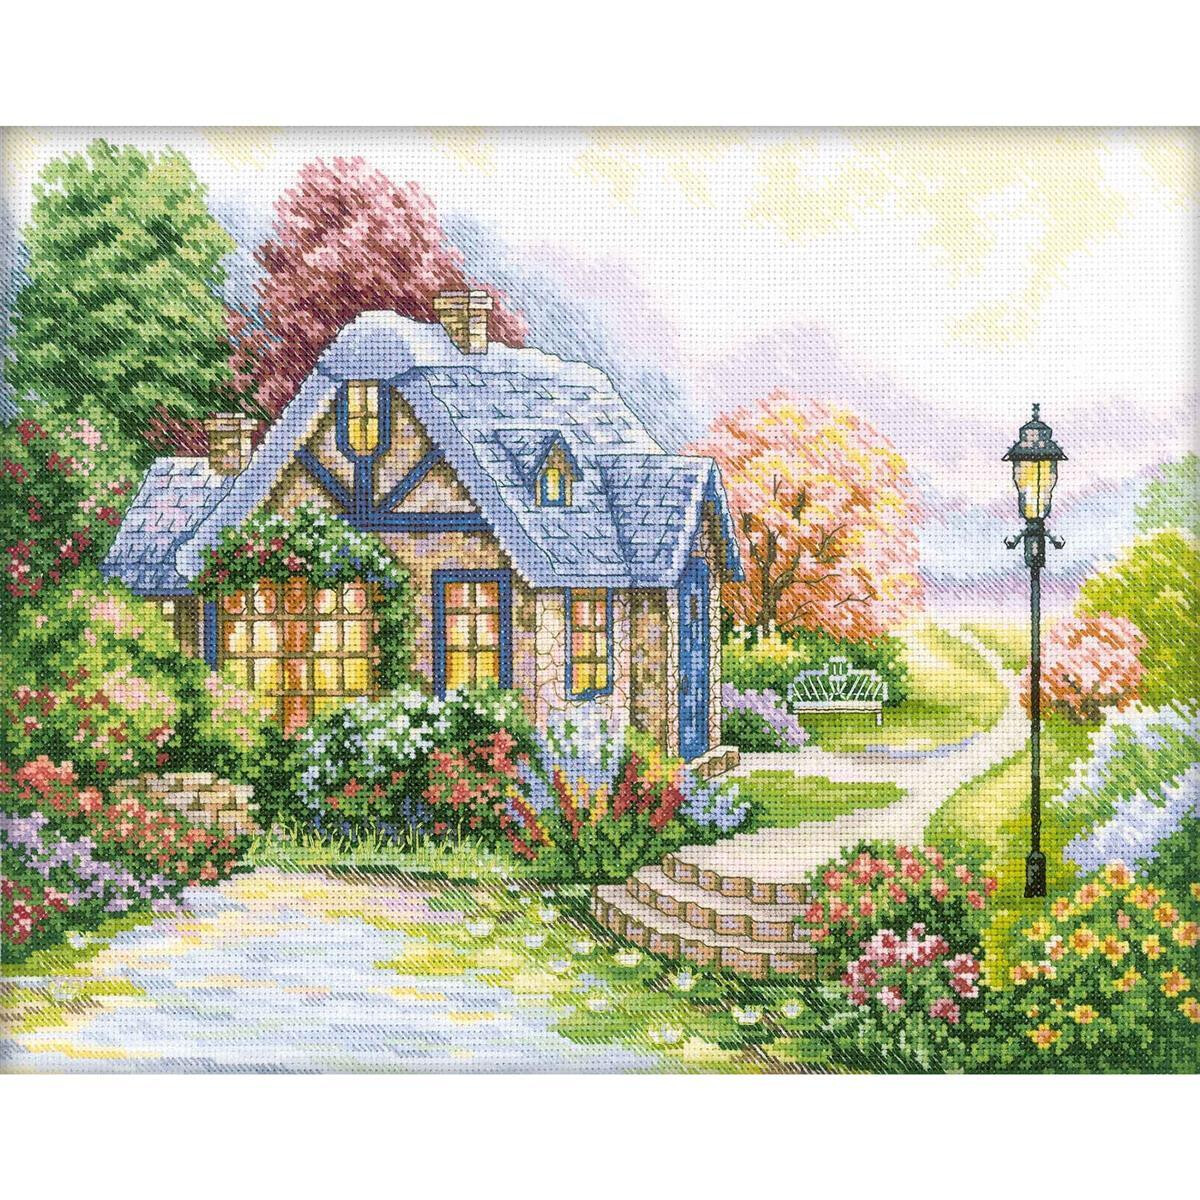 RTO counted Cross Stitch Kit "Home, sweet...